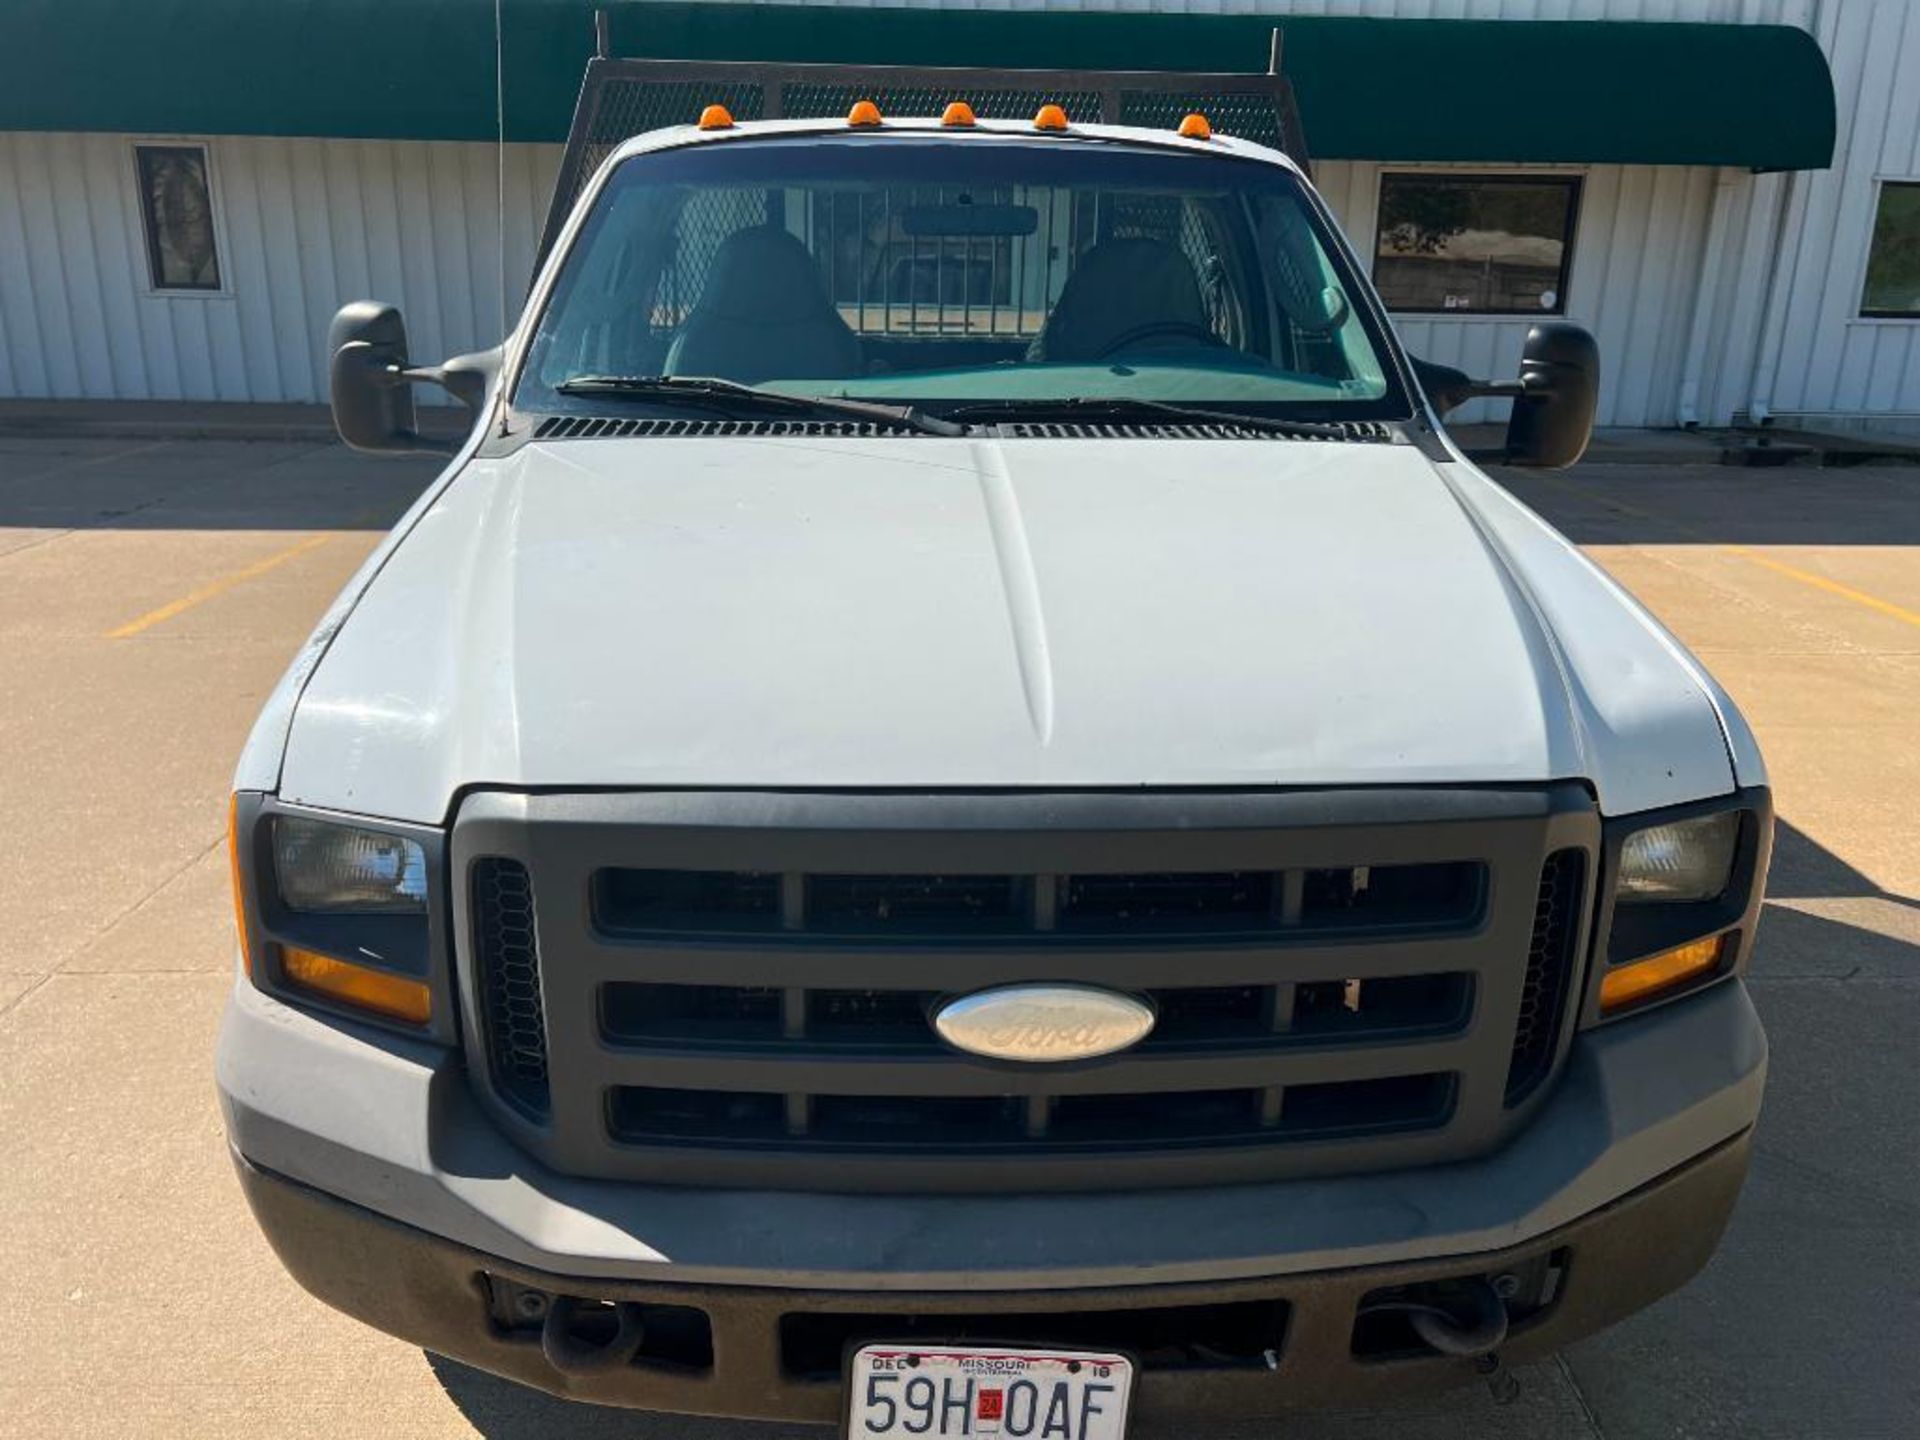 2005 Ford F-350 XL Super Duty Flat Bed Dually Pick up Truck, VIN #1FDWF36P55EA47254, Miles 377,413, - Image 7 of 23